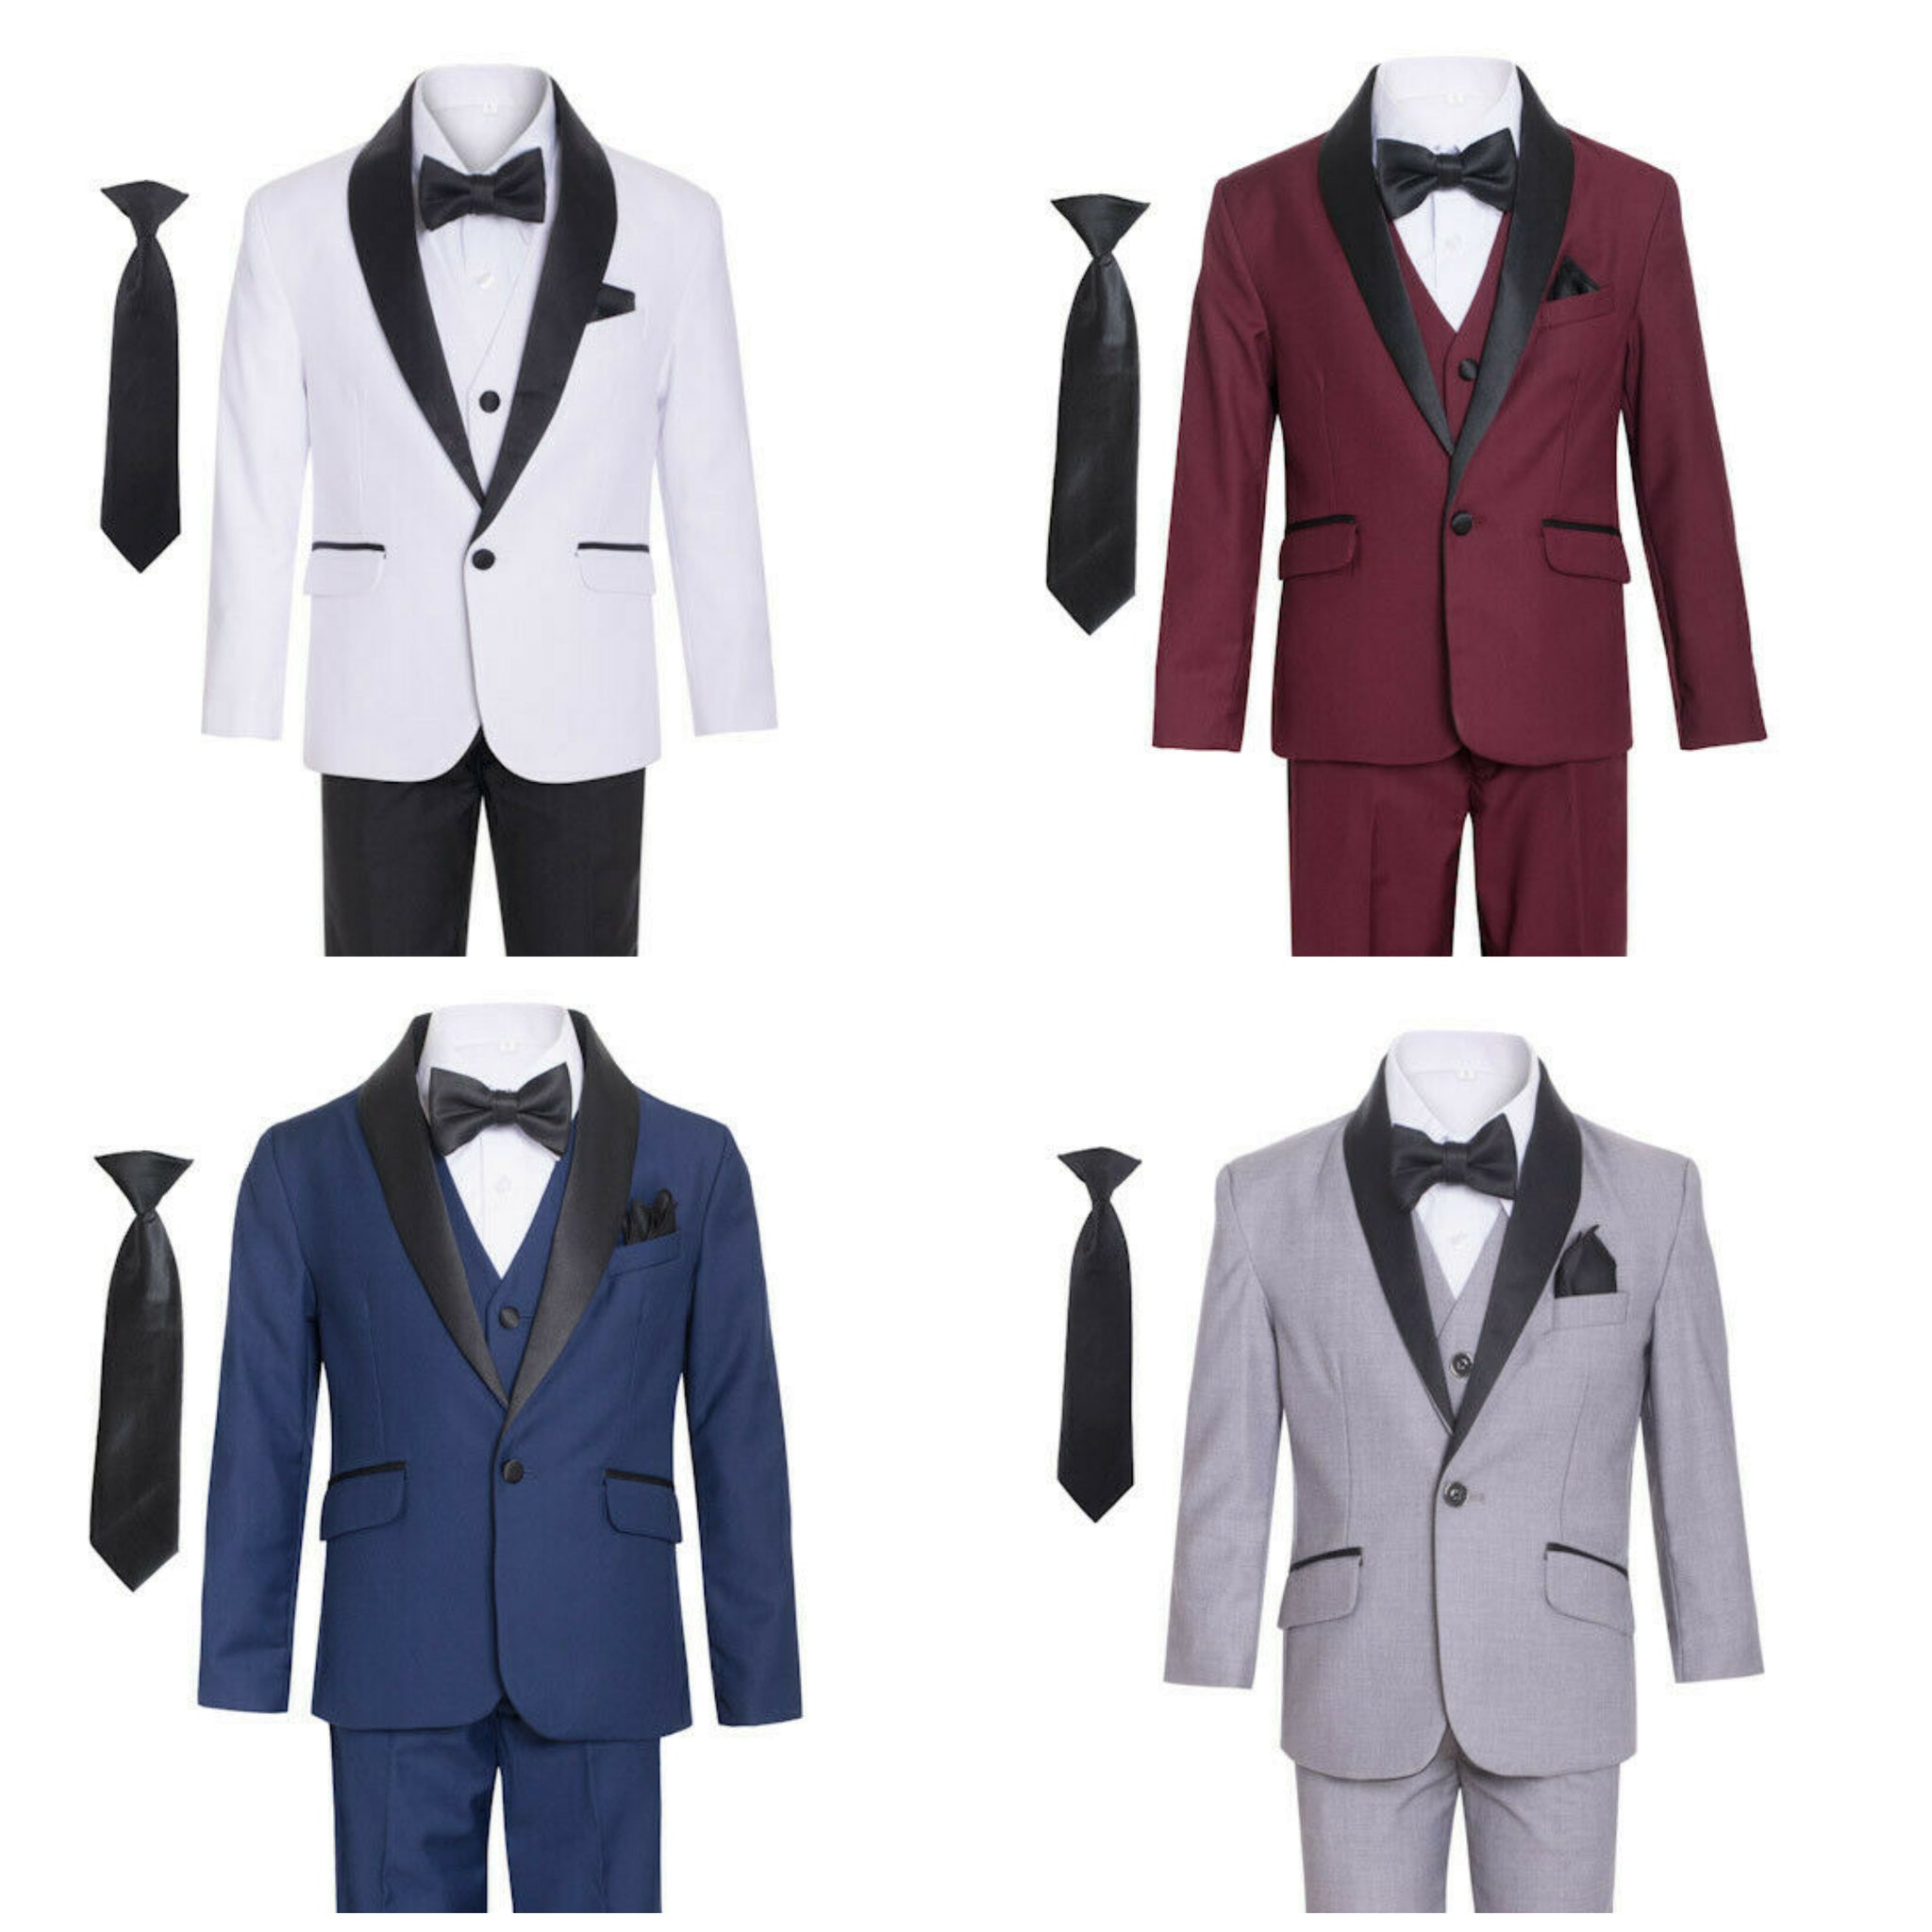 A young gentleman steals the show in the captivating Shawl Tuxedo Suit, available in a range of colors.